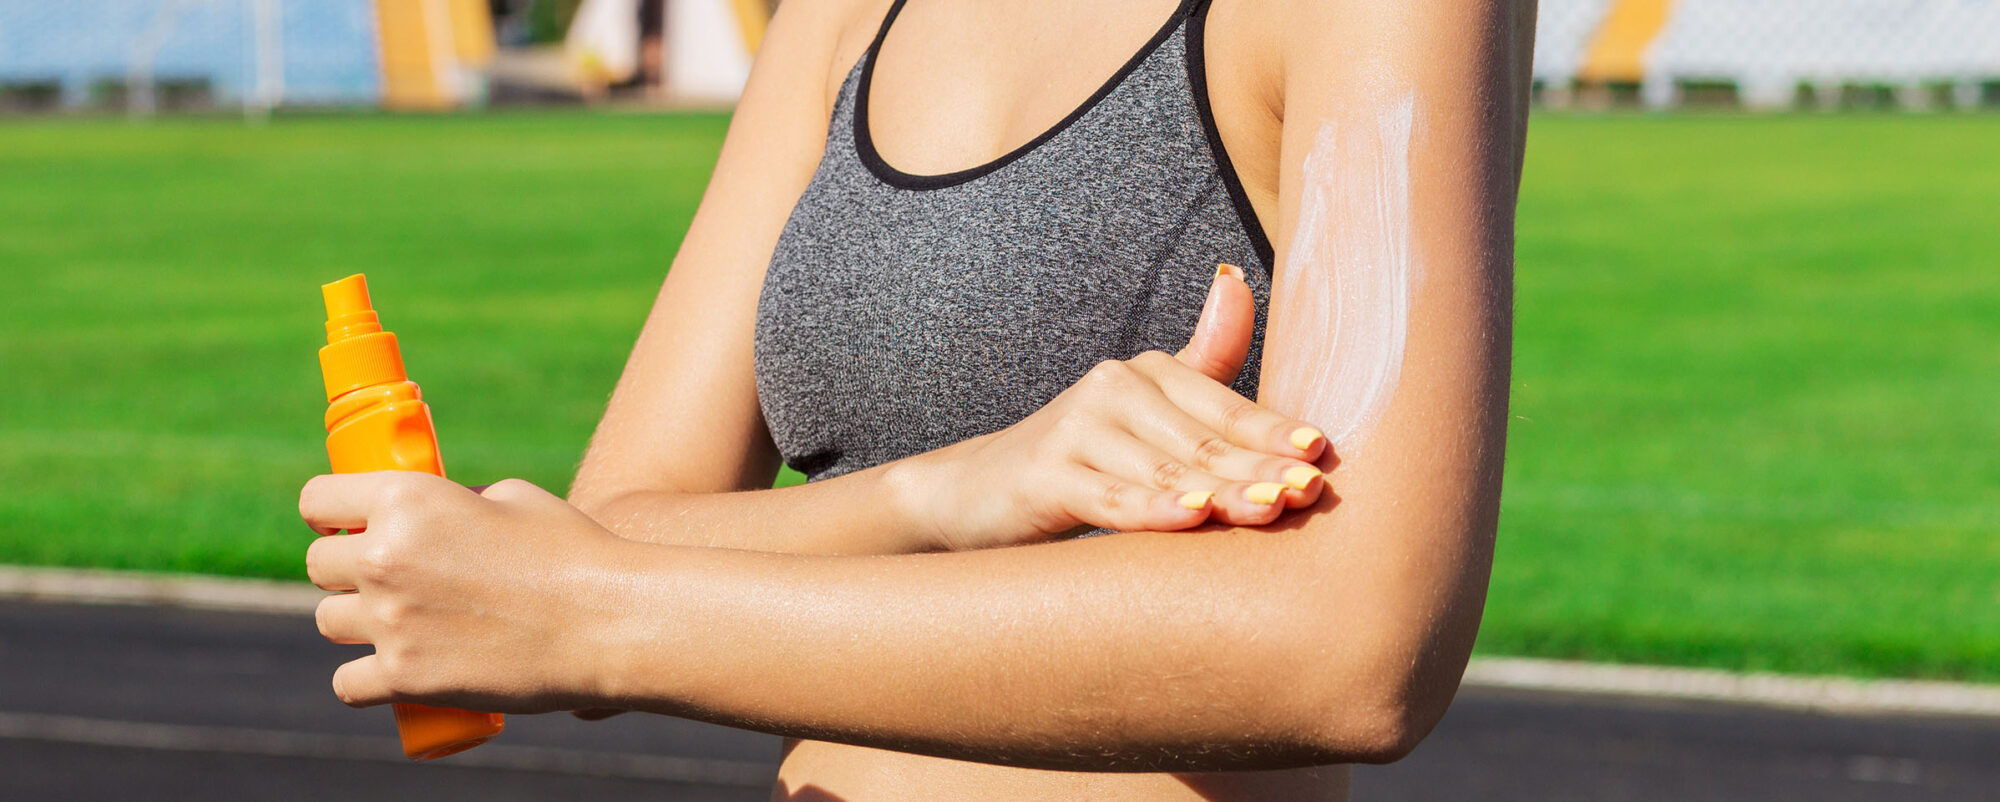 Young Woman Is Applying Sunscreen On Her Arms Before Physical Activities At The Stadium. Protect Your Skin From Sunburn